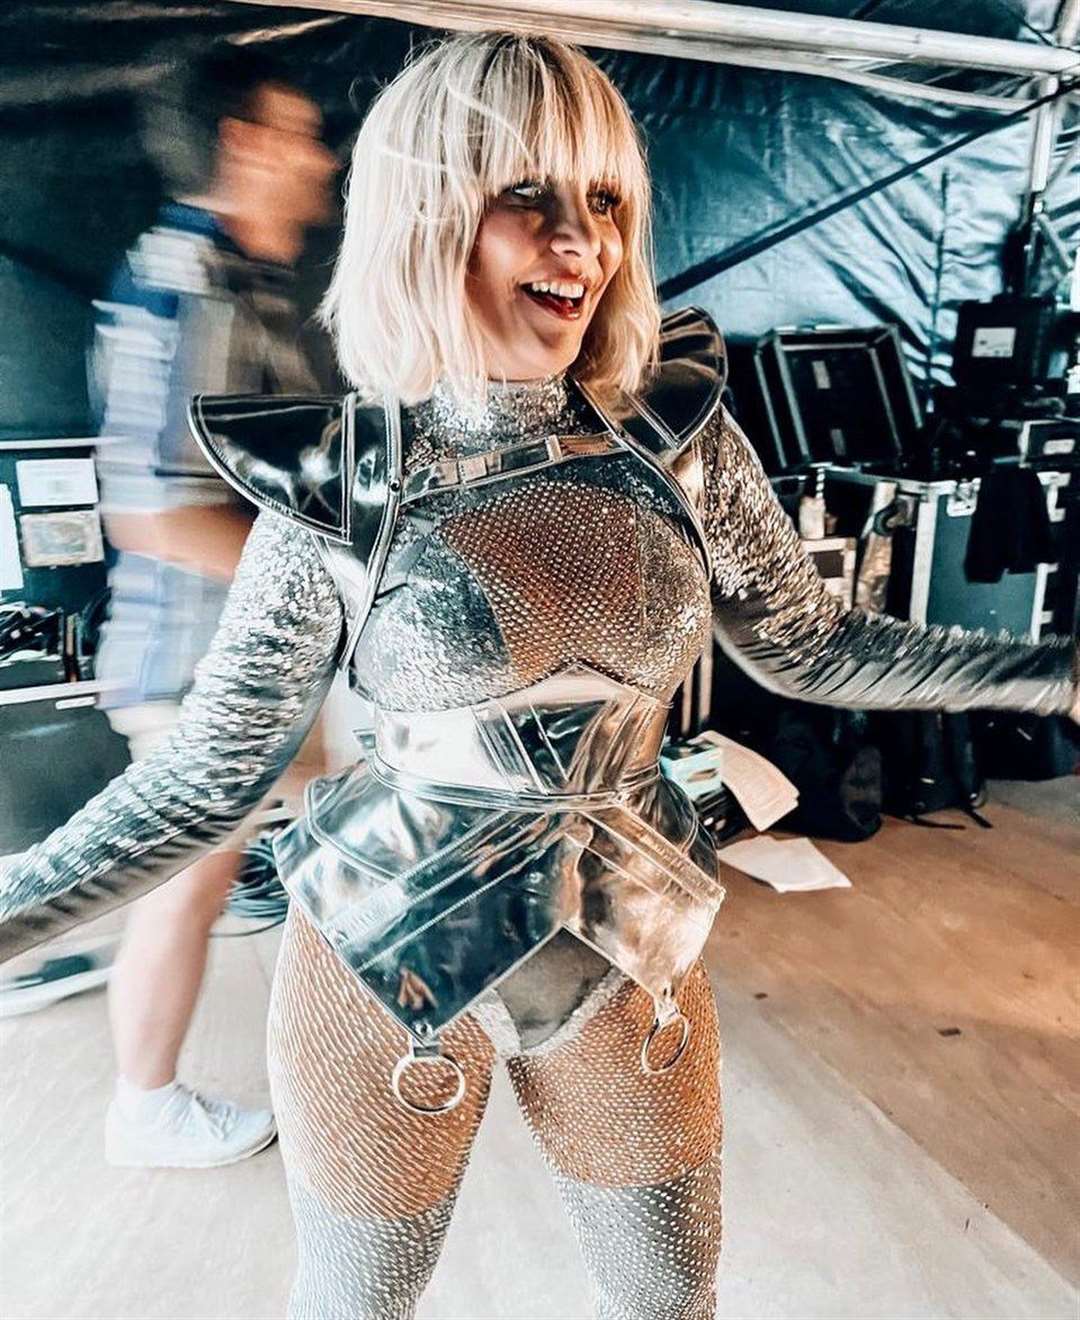 Claire Richards of dance-pop group Steps will be performing at Margate Pride. Picture: Instagram/clairerichardsofficial